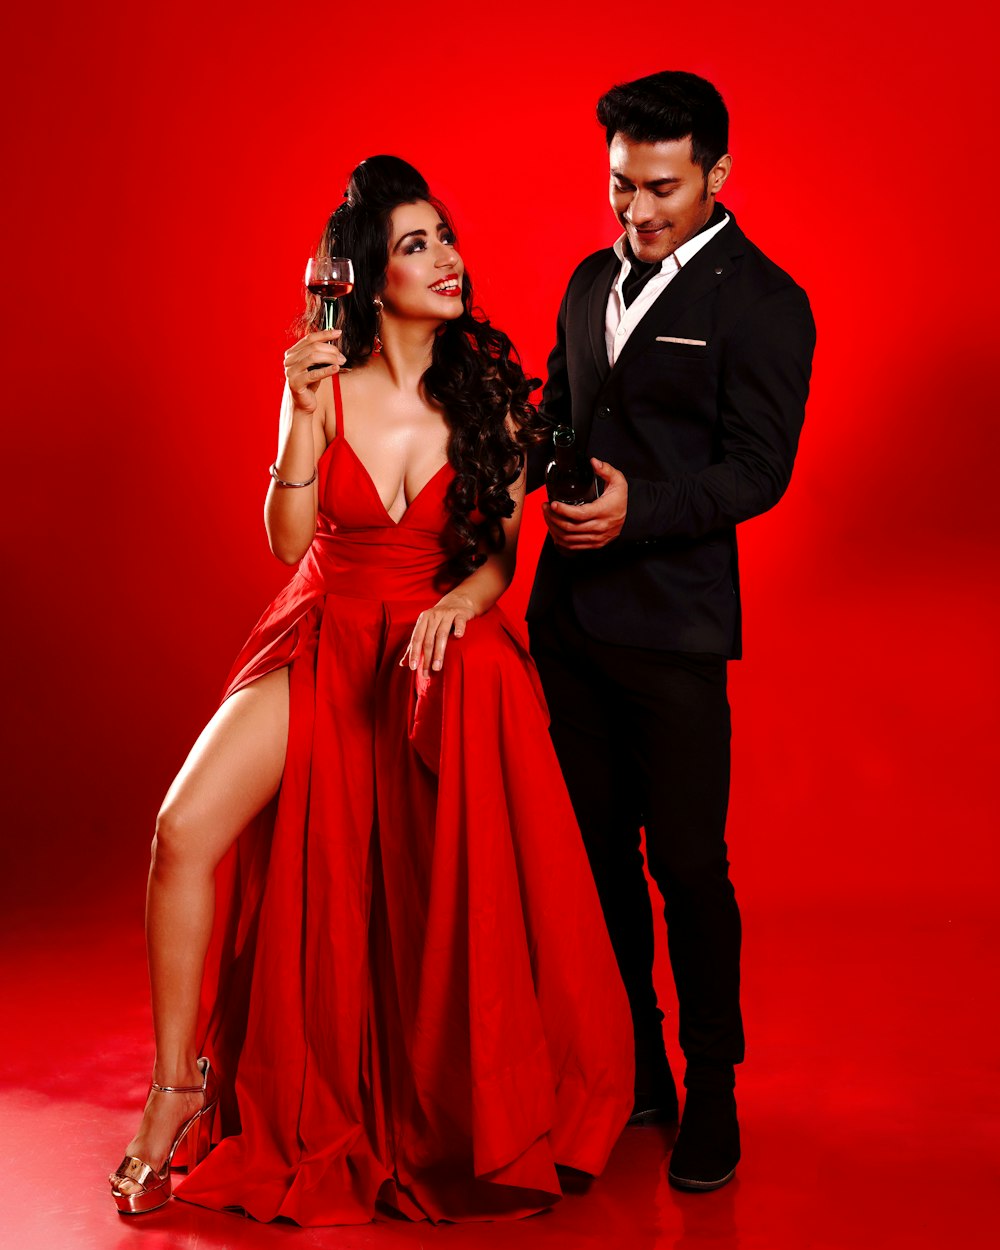 a woman in a red dress and a man in a black suit